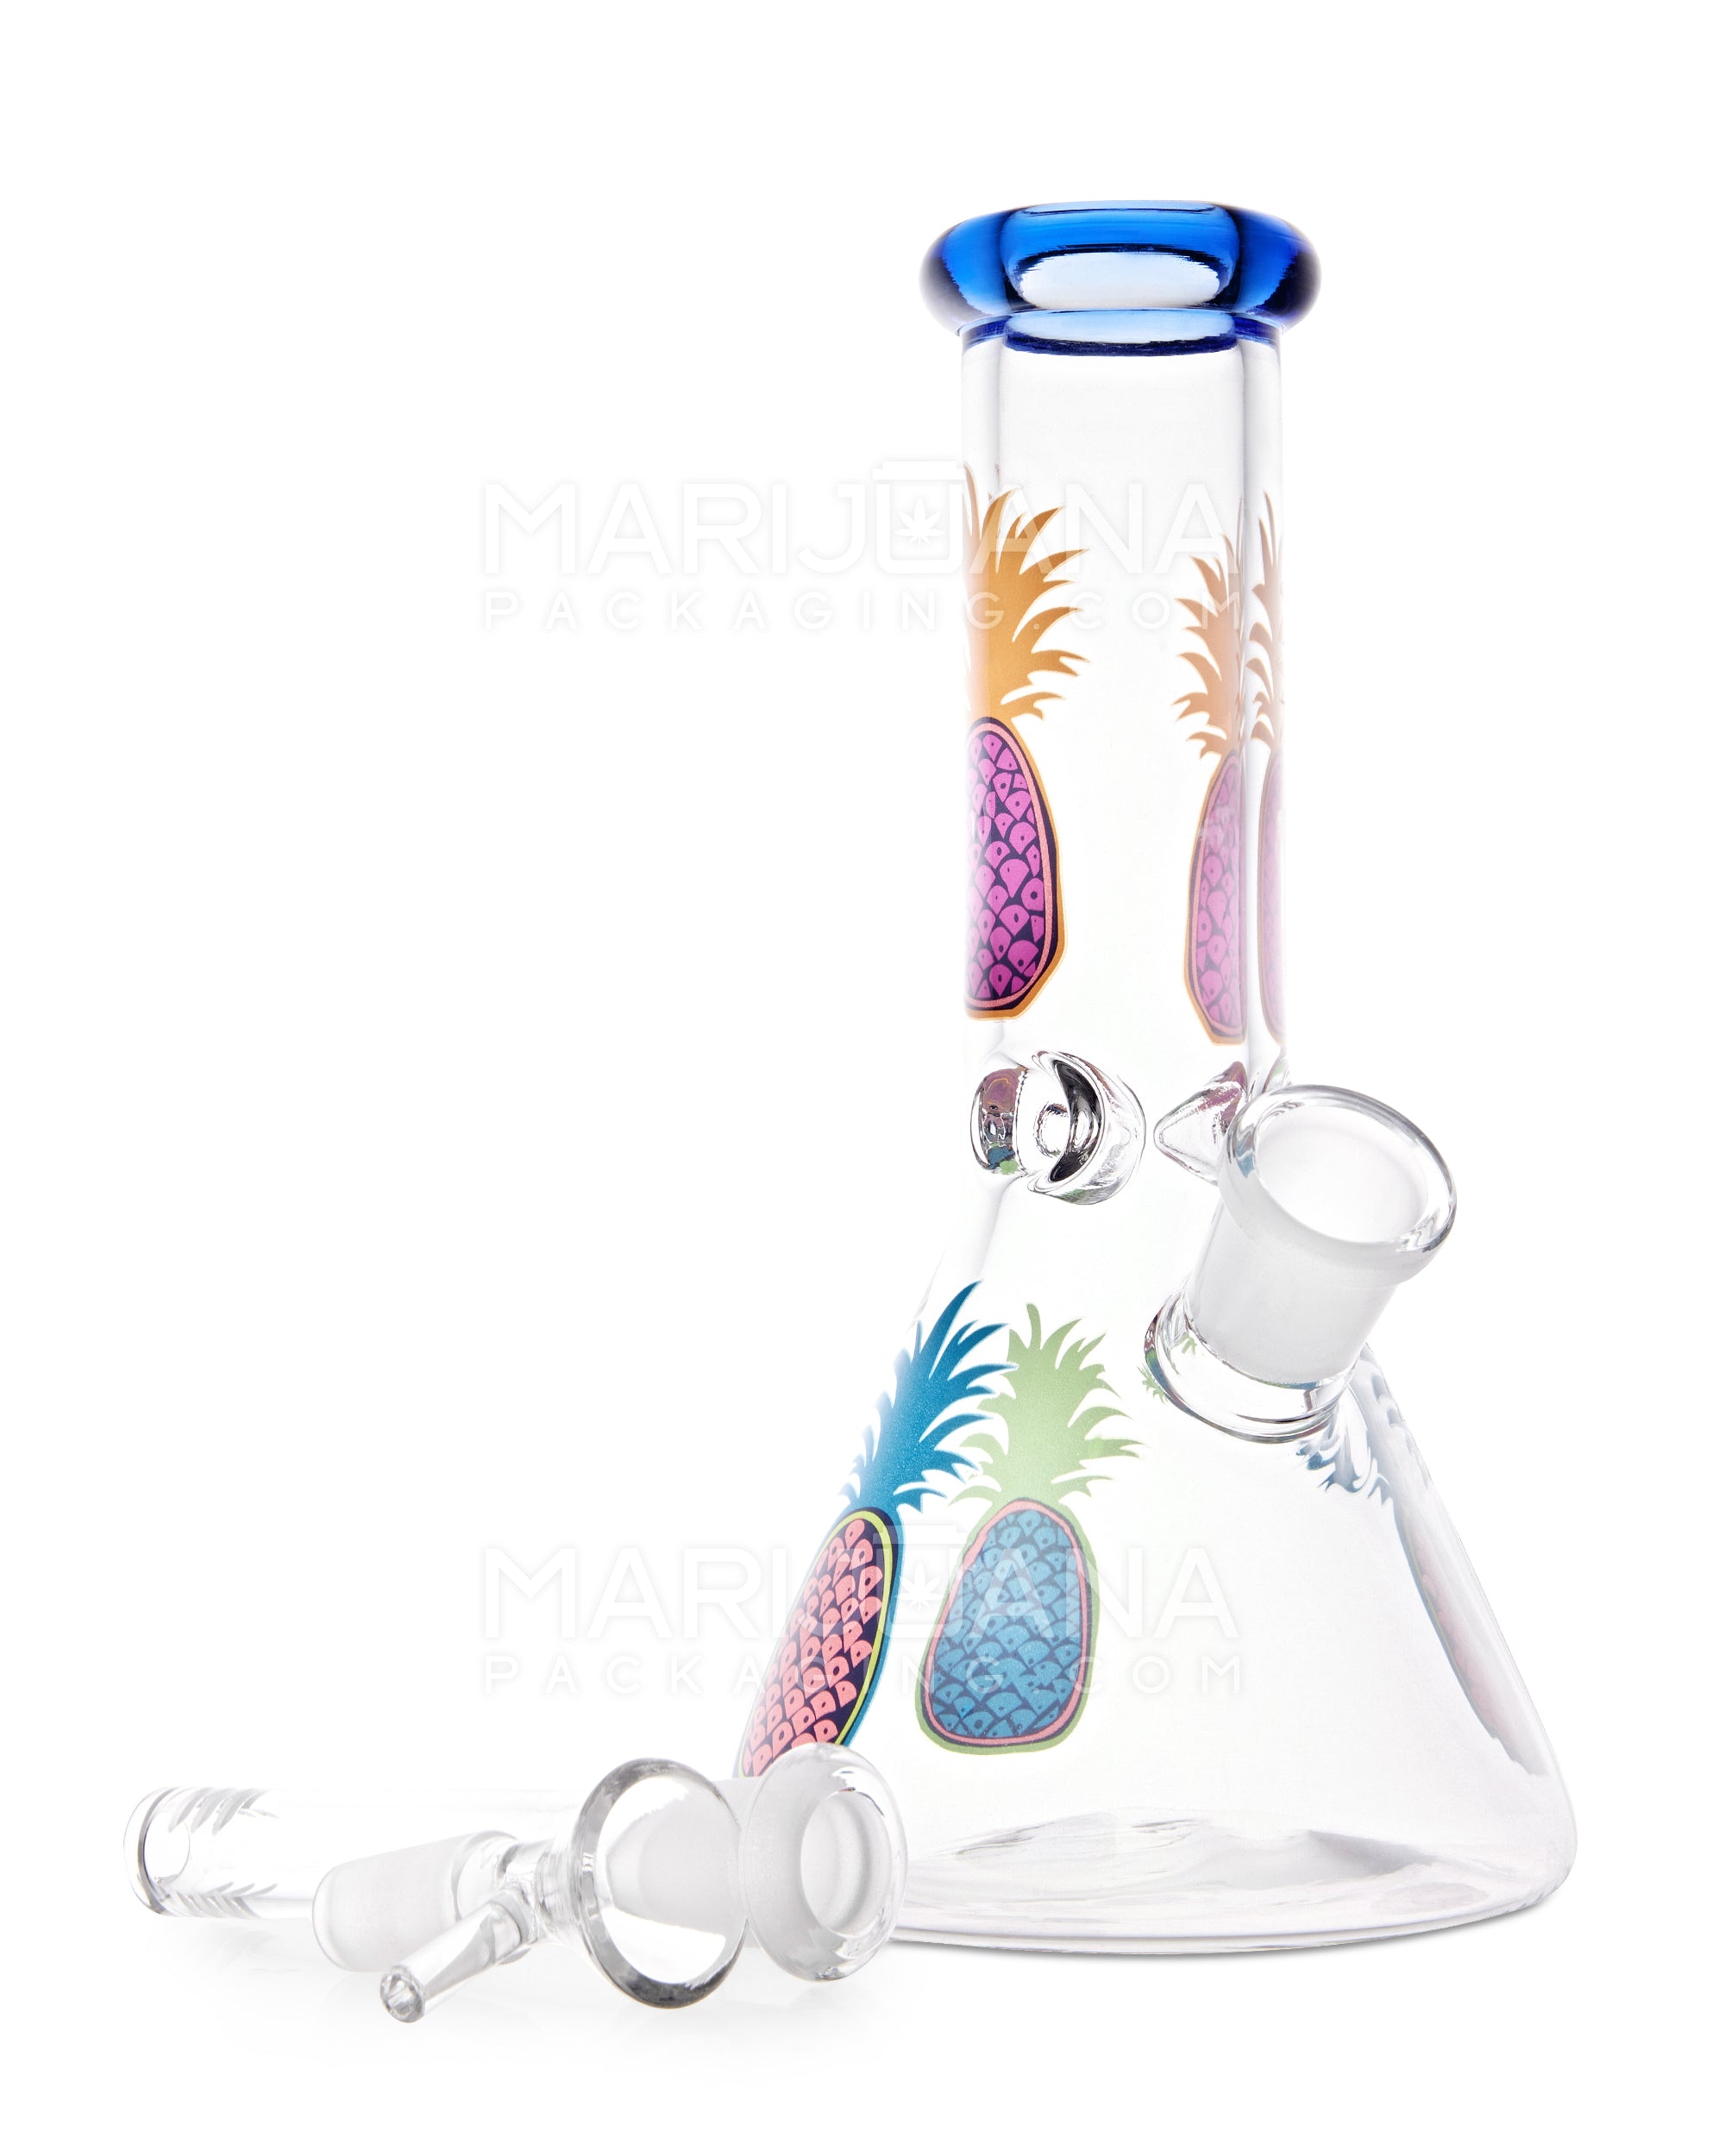 Cheap Bongs Under $25: Get The Best Dab Rigs Under $25